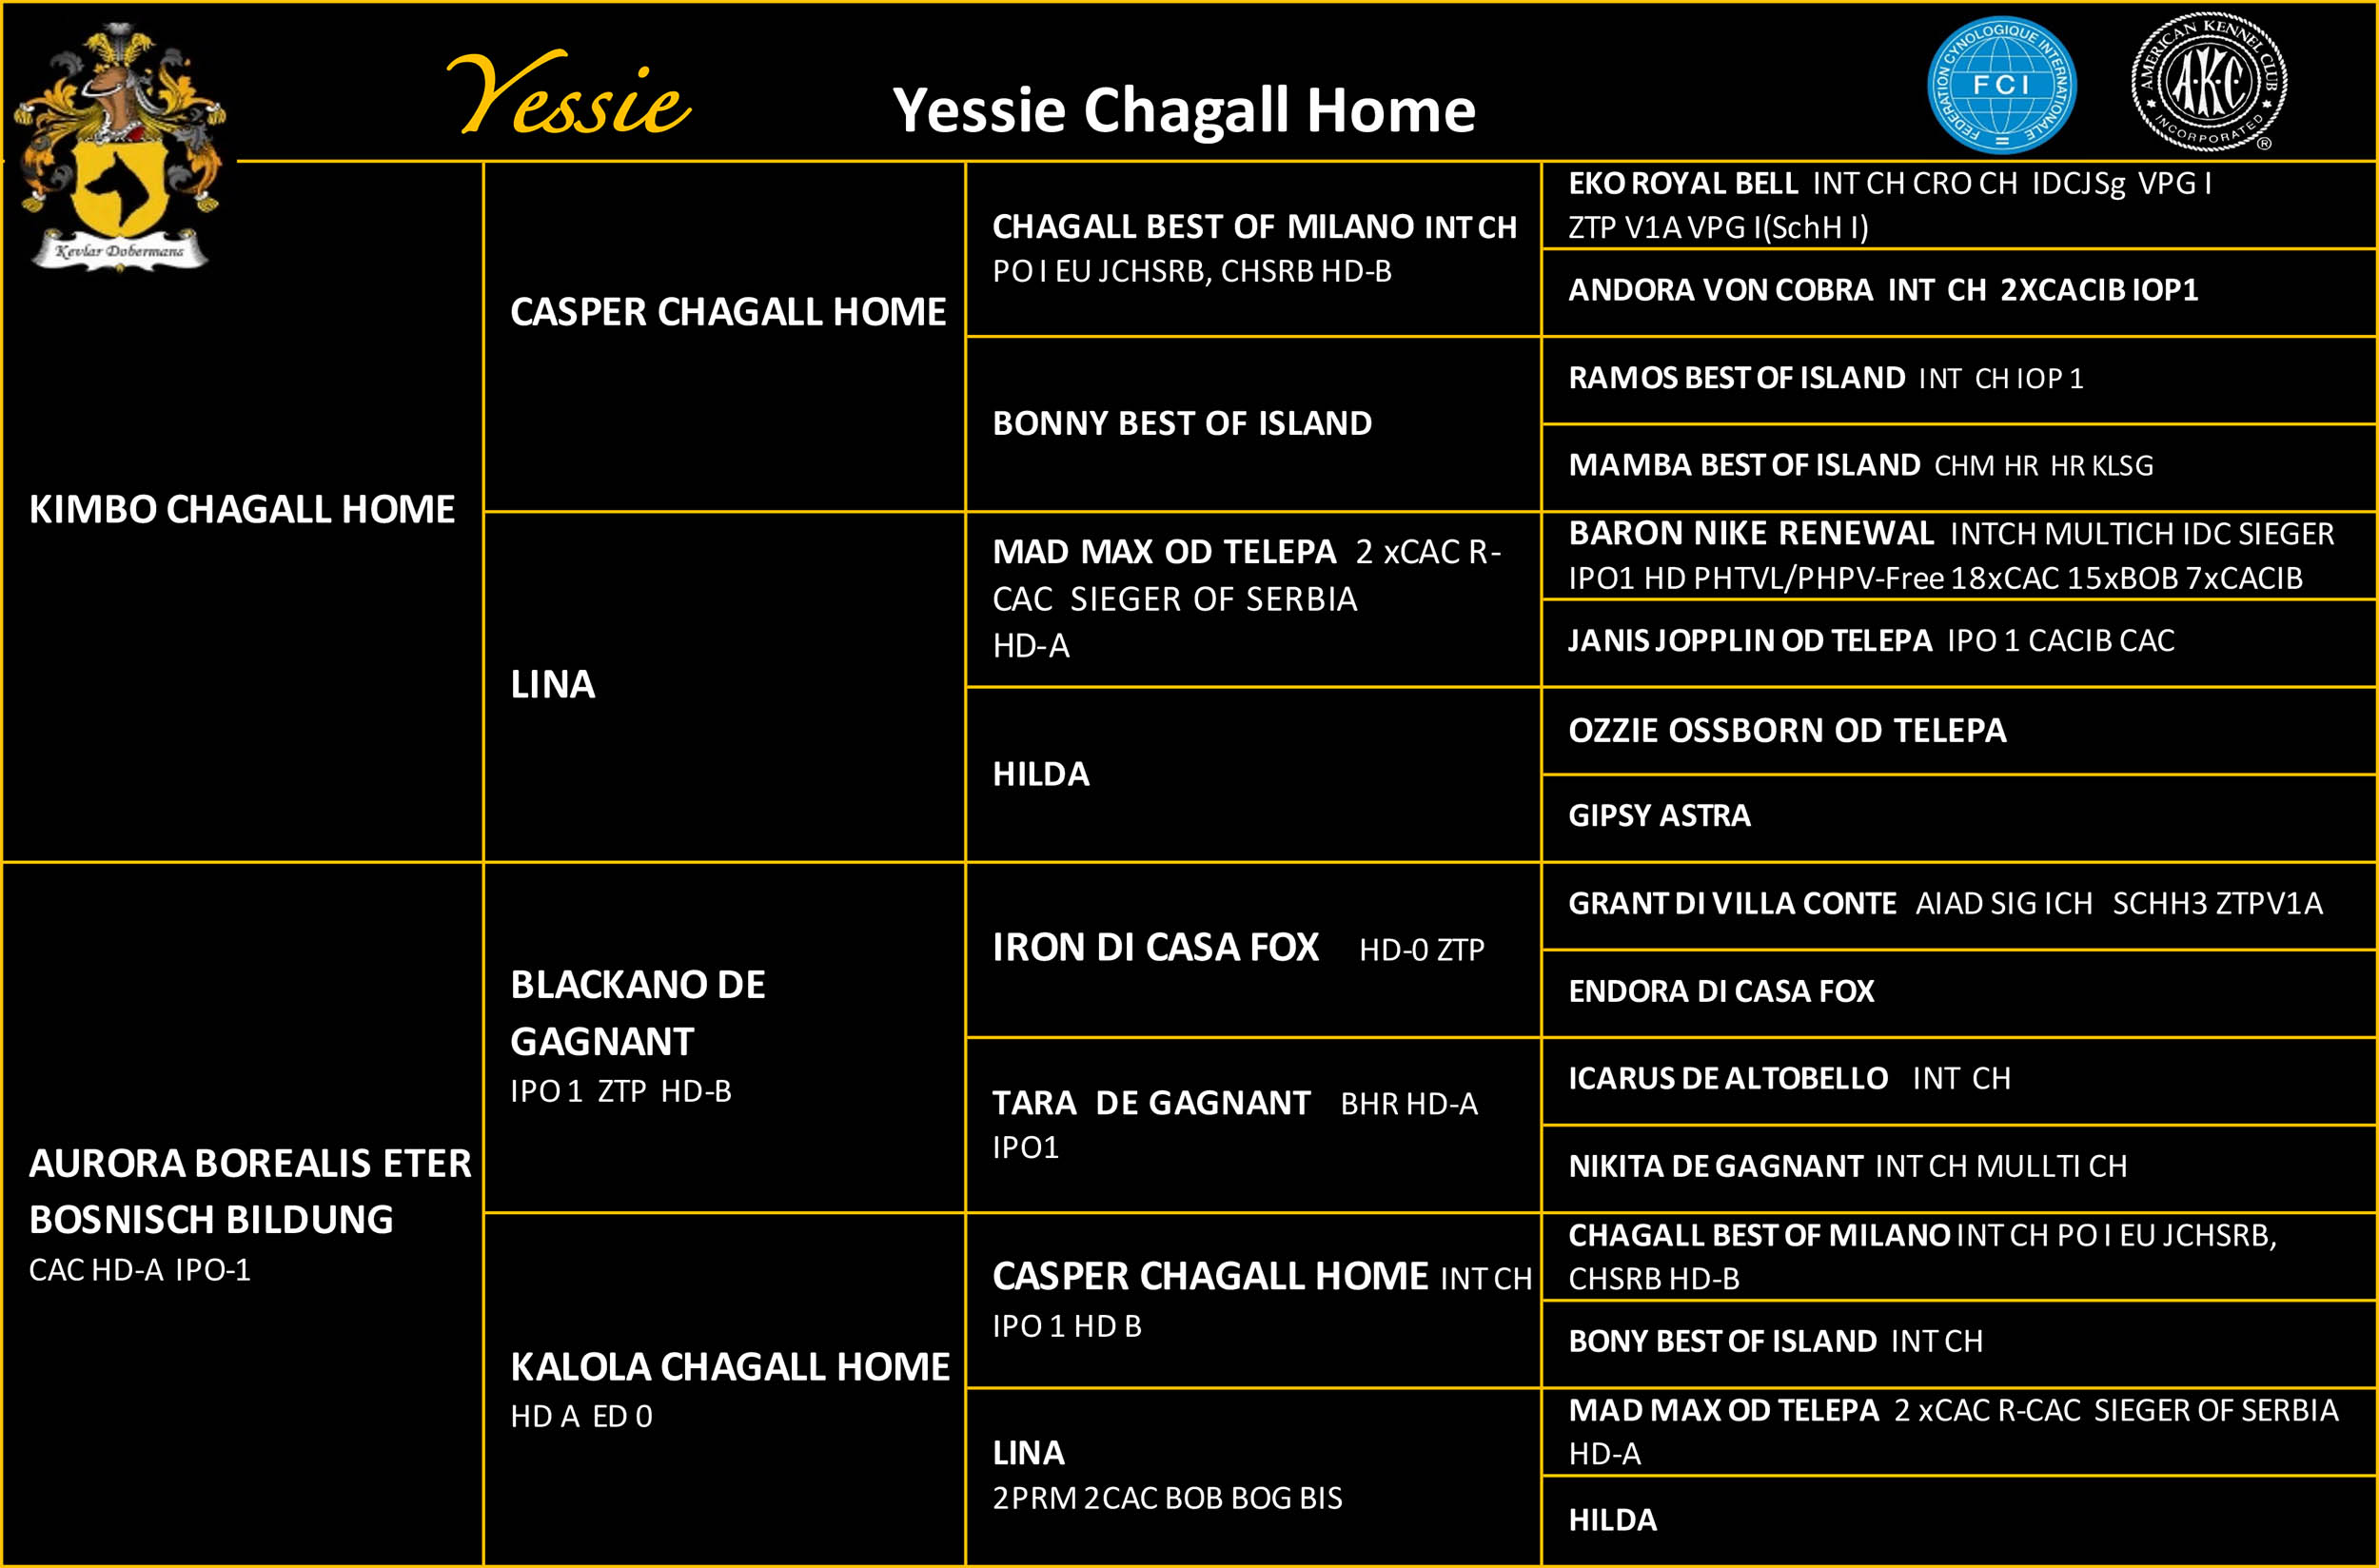 Yessie Chagall Home